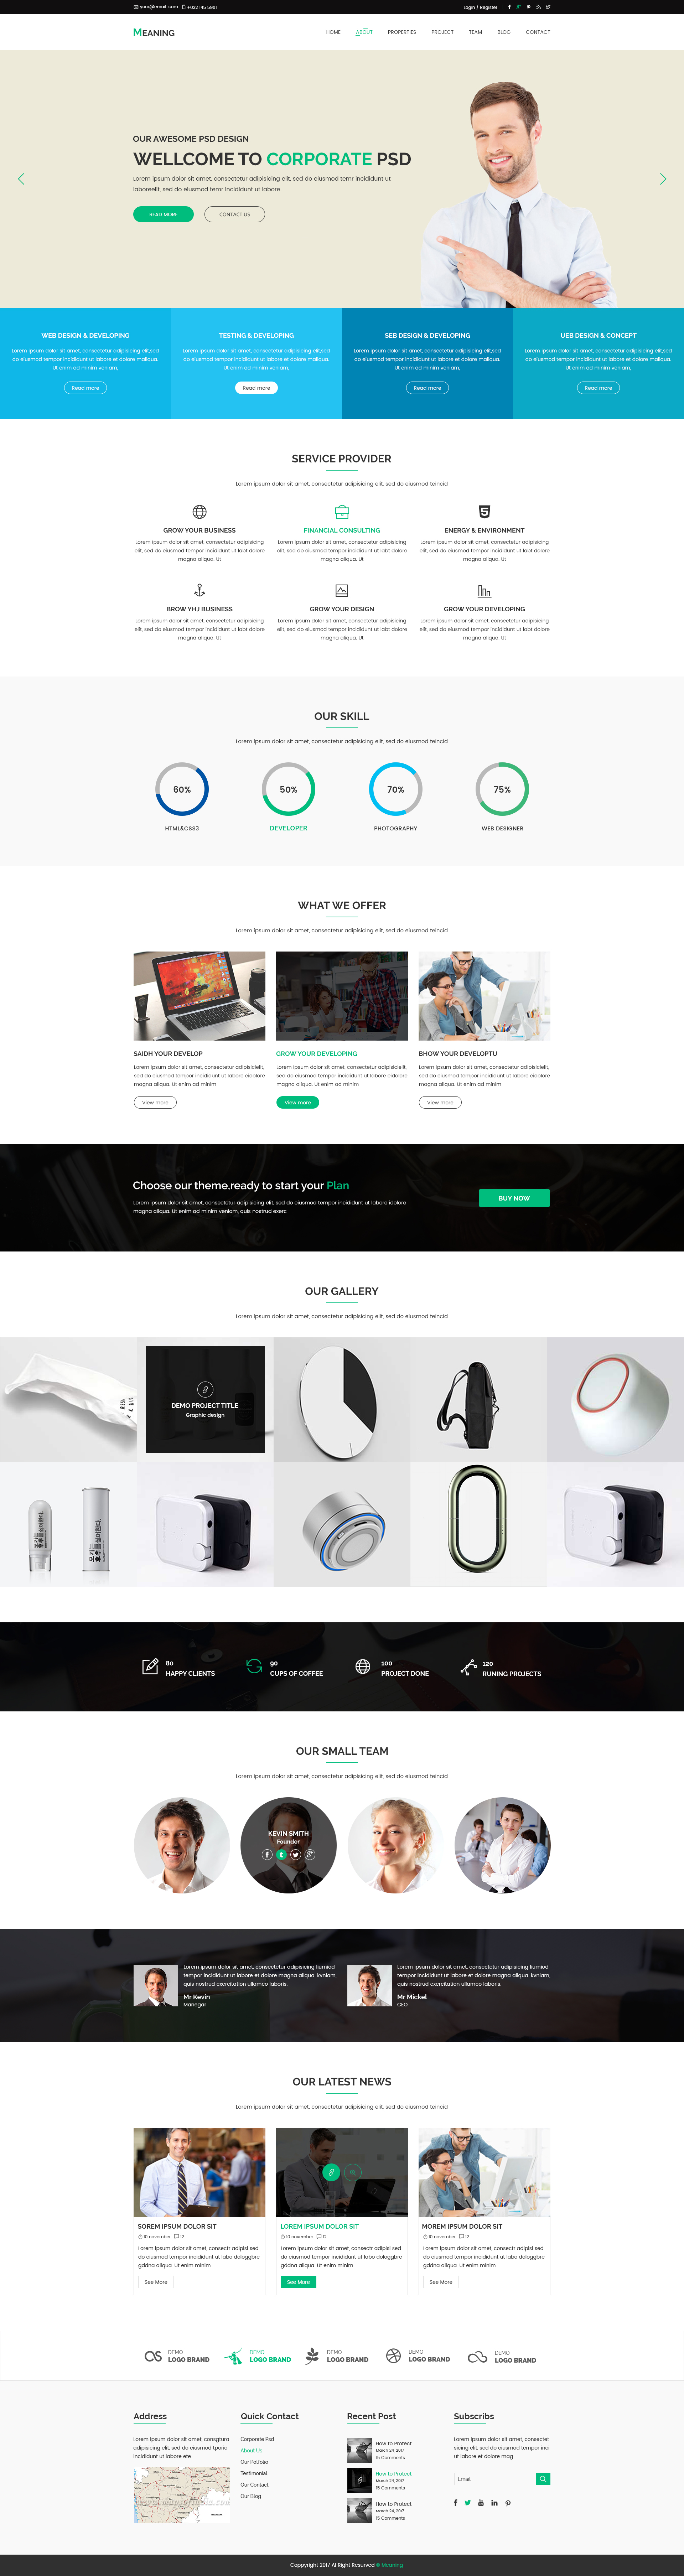 Meaning - Corporate PSD Template